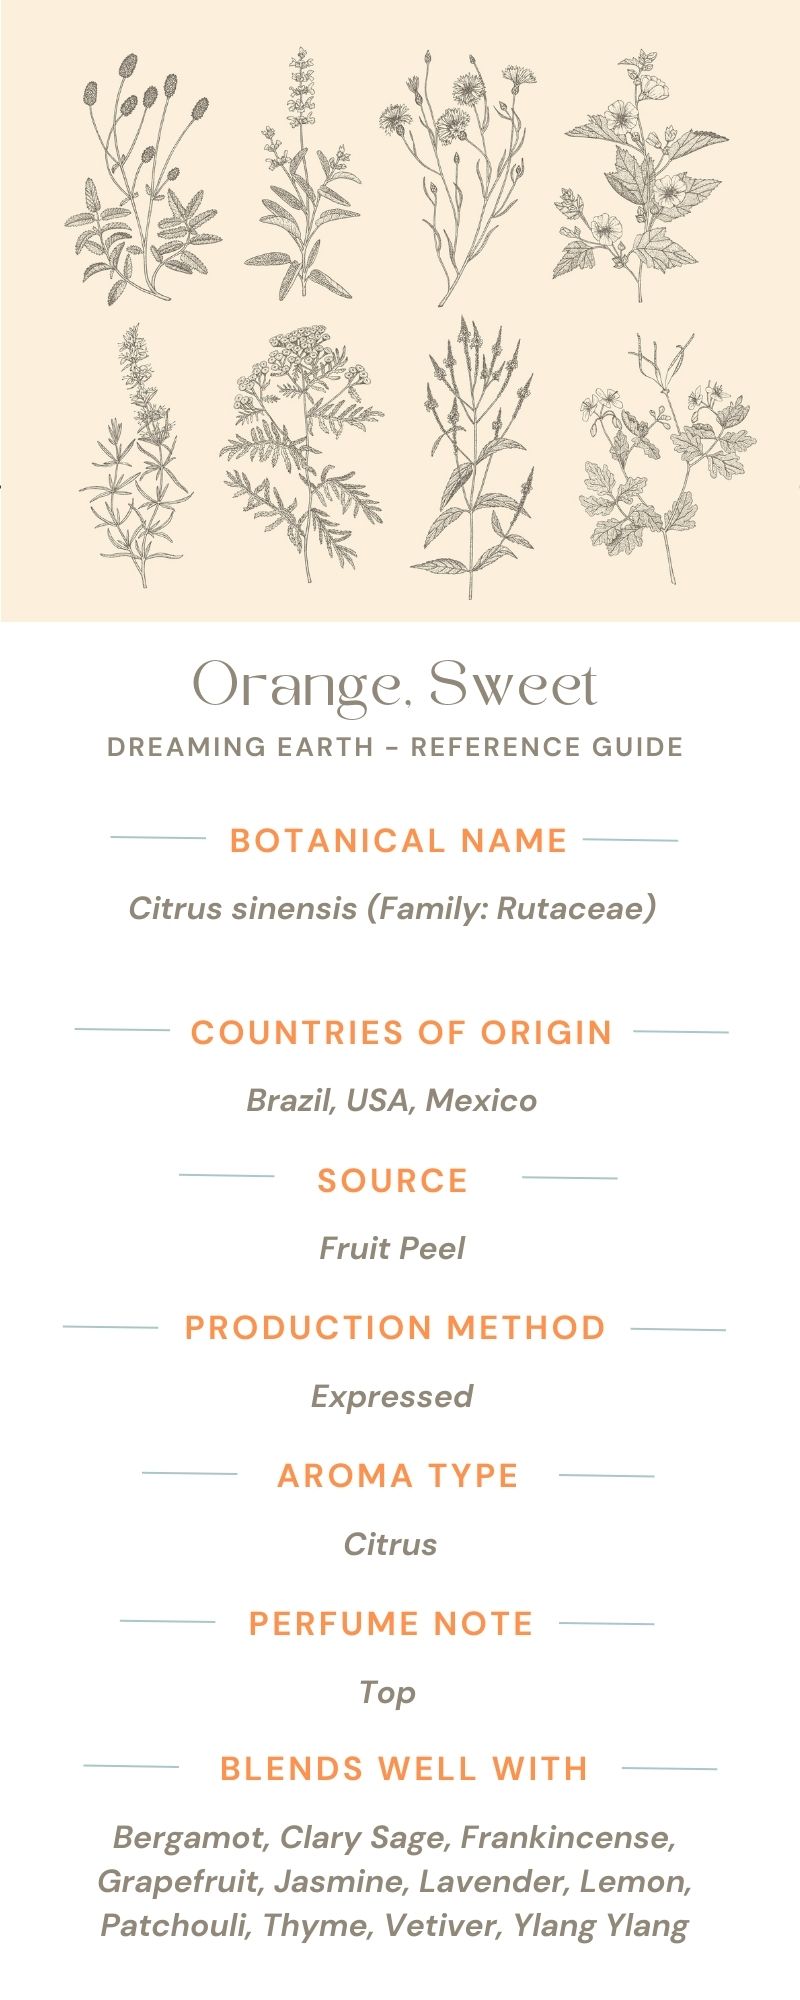 Load image into Gallery viewer, Orange, Sweet Organic Essential Oil - Dreaming Earth Inc
